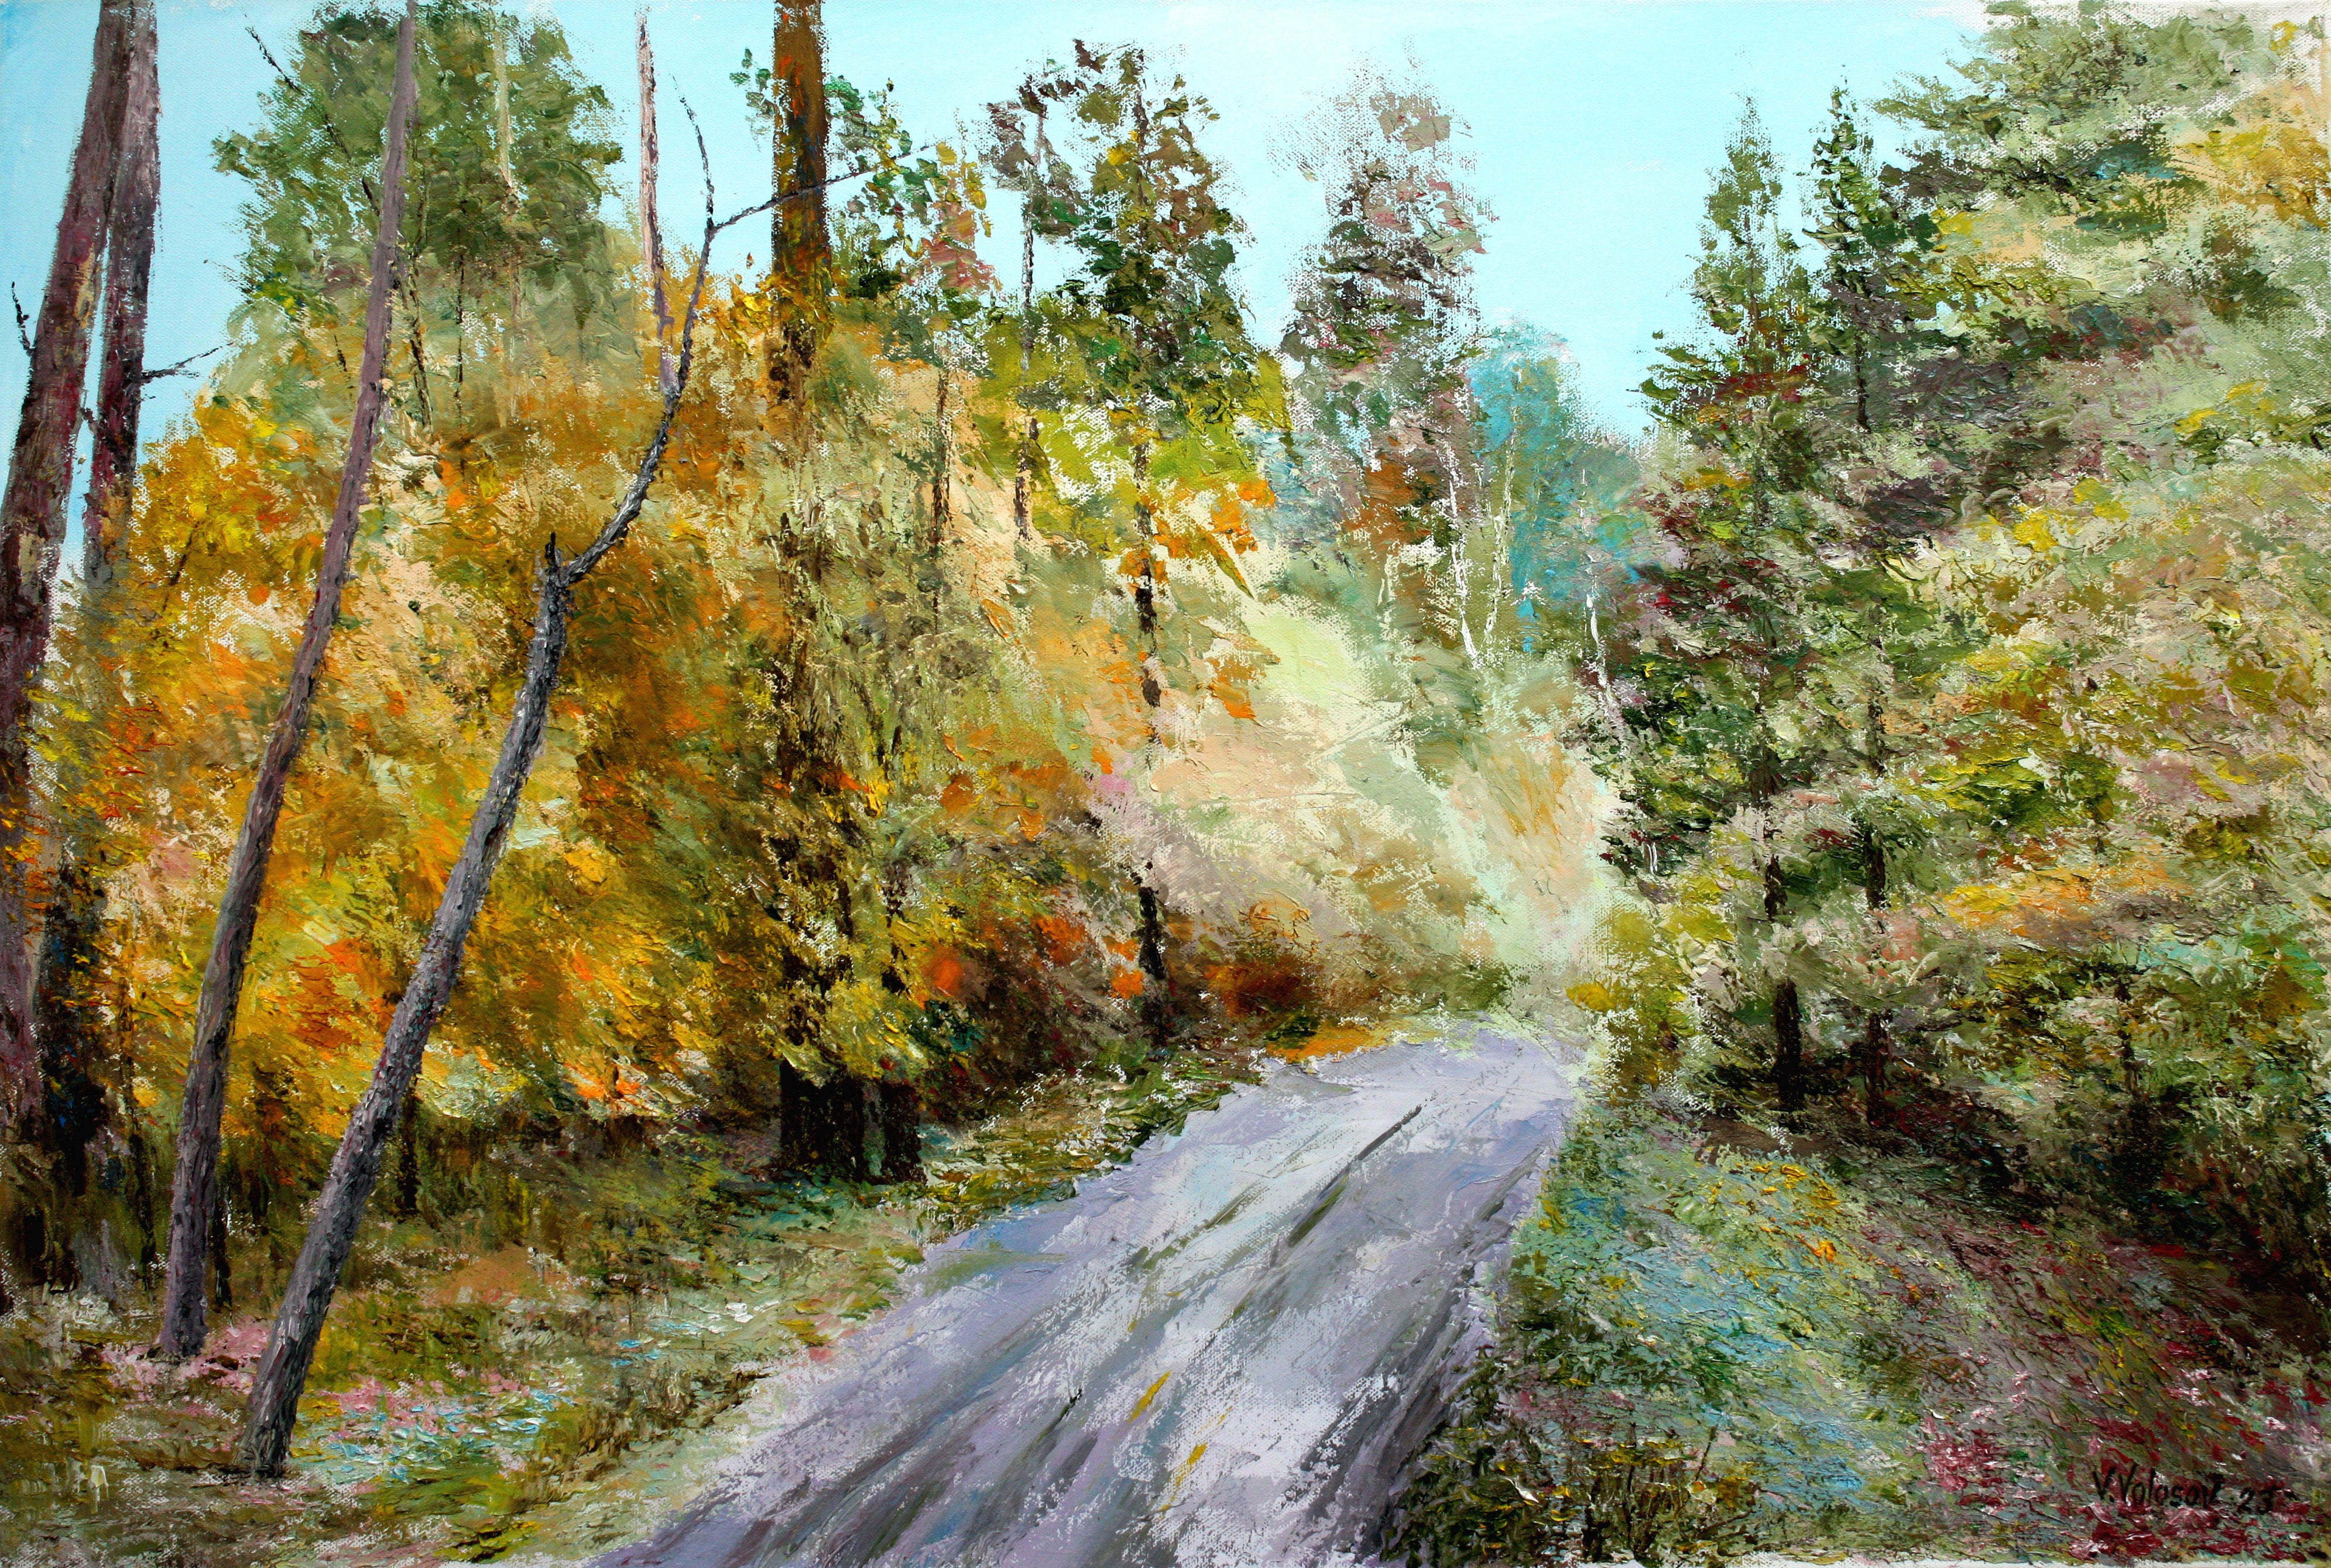 'IN AN AUTUMN FOREST' - Oil on Canvas